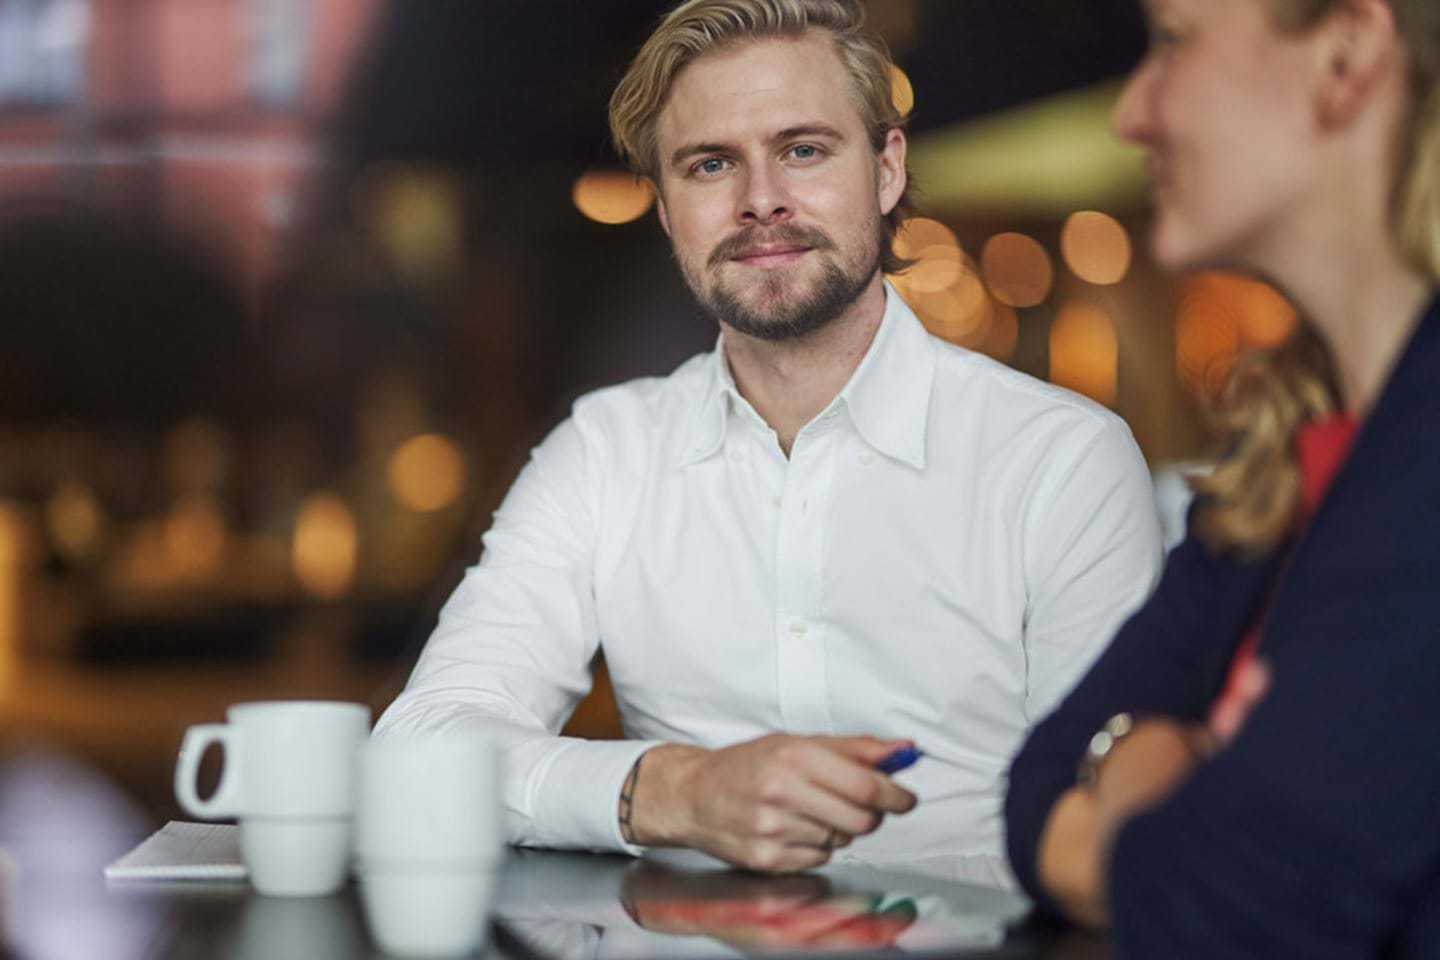 A man in a white shirt looks at the camera while sitting at a cafe table.